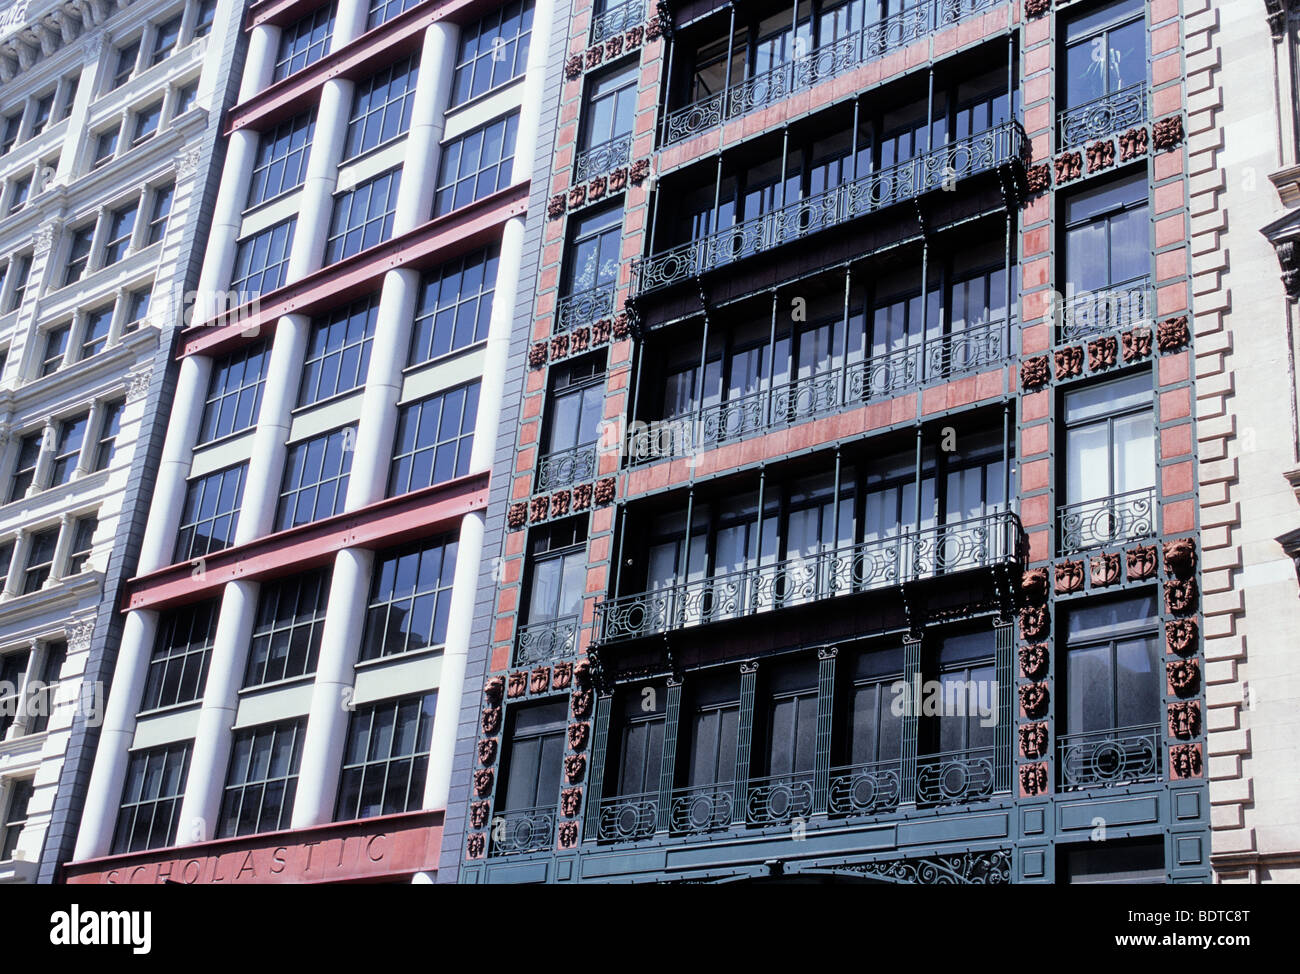 New York City, New York, Lower Manhattan, Broadway loft buildings typical facades. Cast Iron architecture. Historic District 19th Century USA Stock Photo